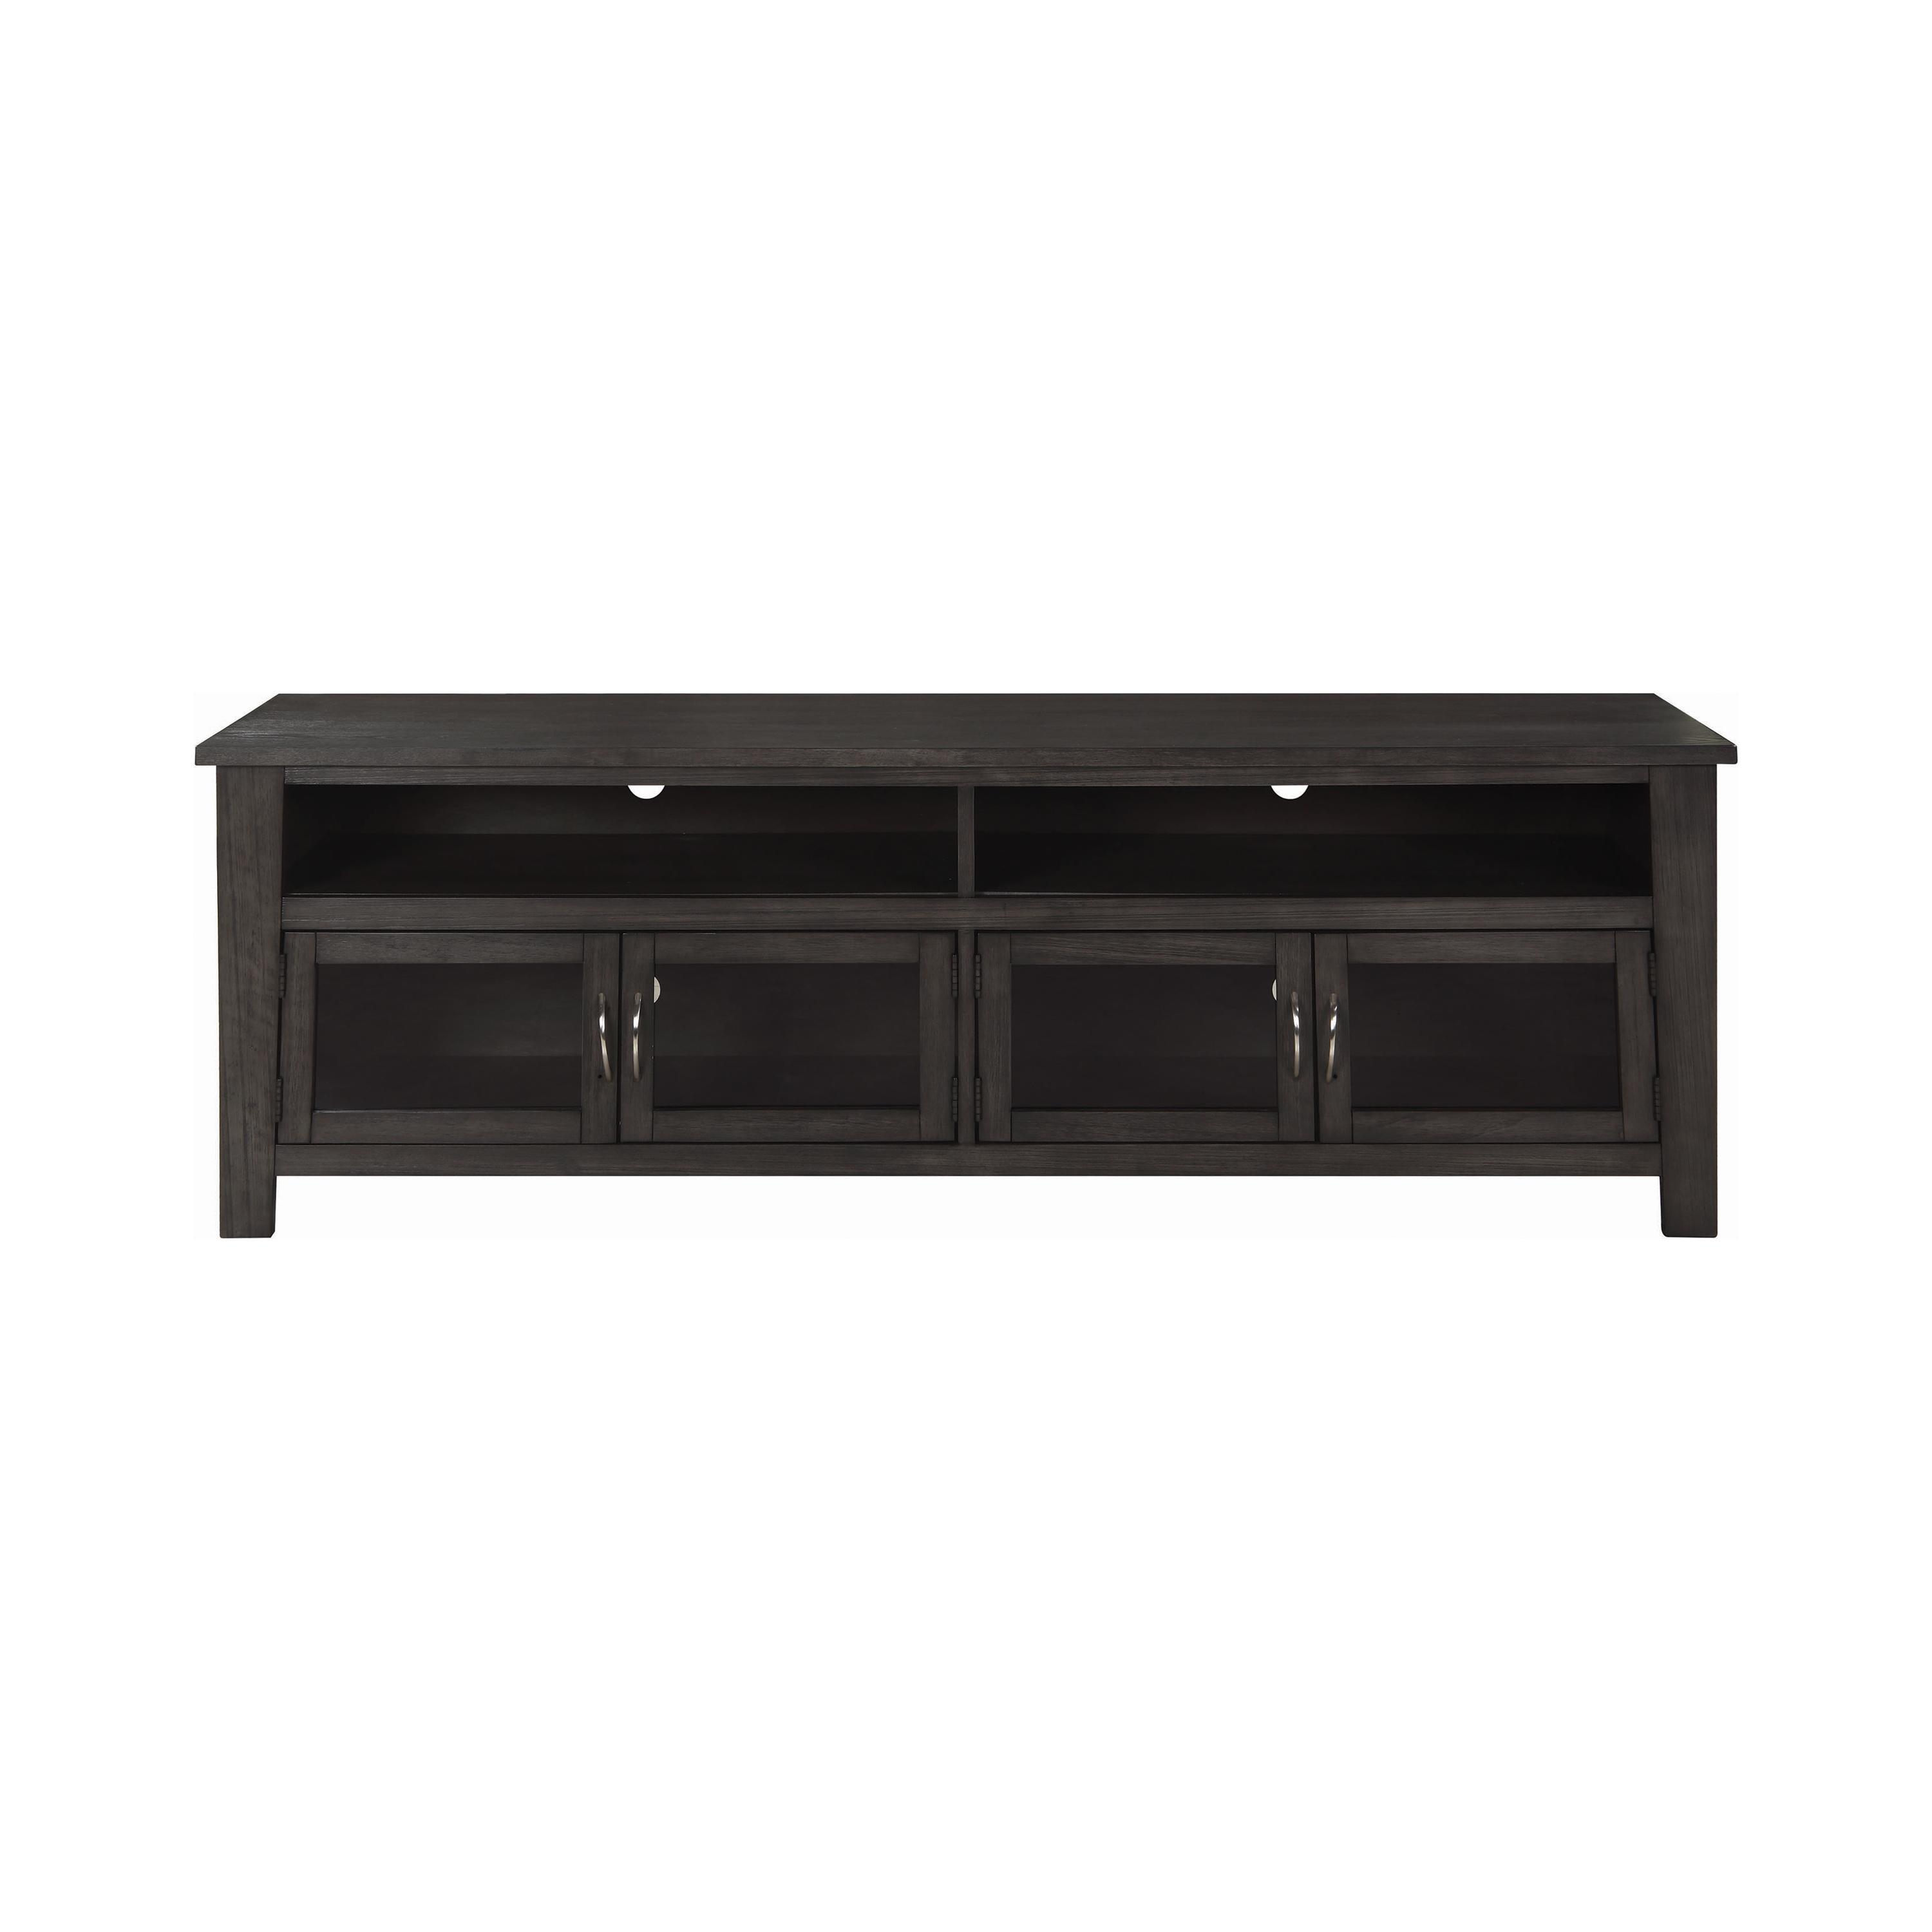 Transitional Tv Console 722223 722223 in Dark Gray 